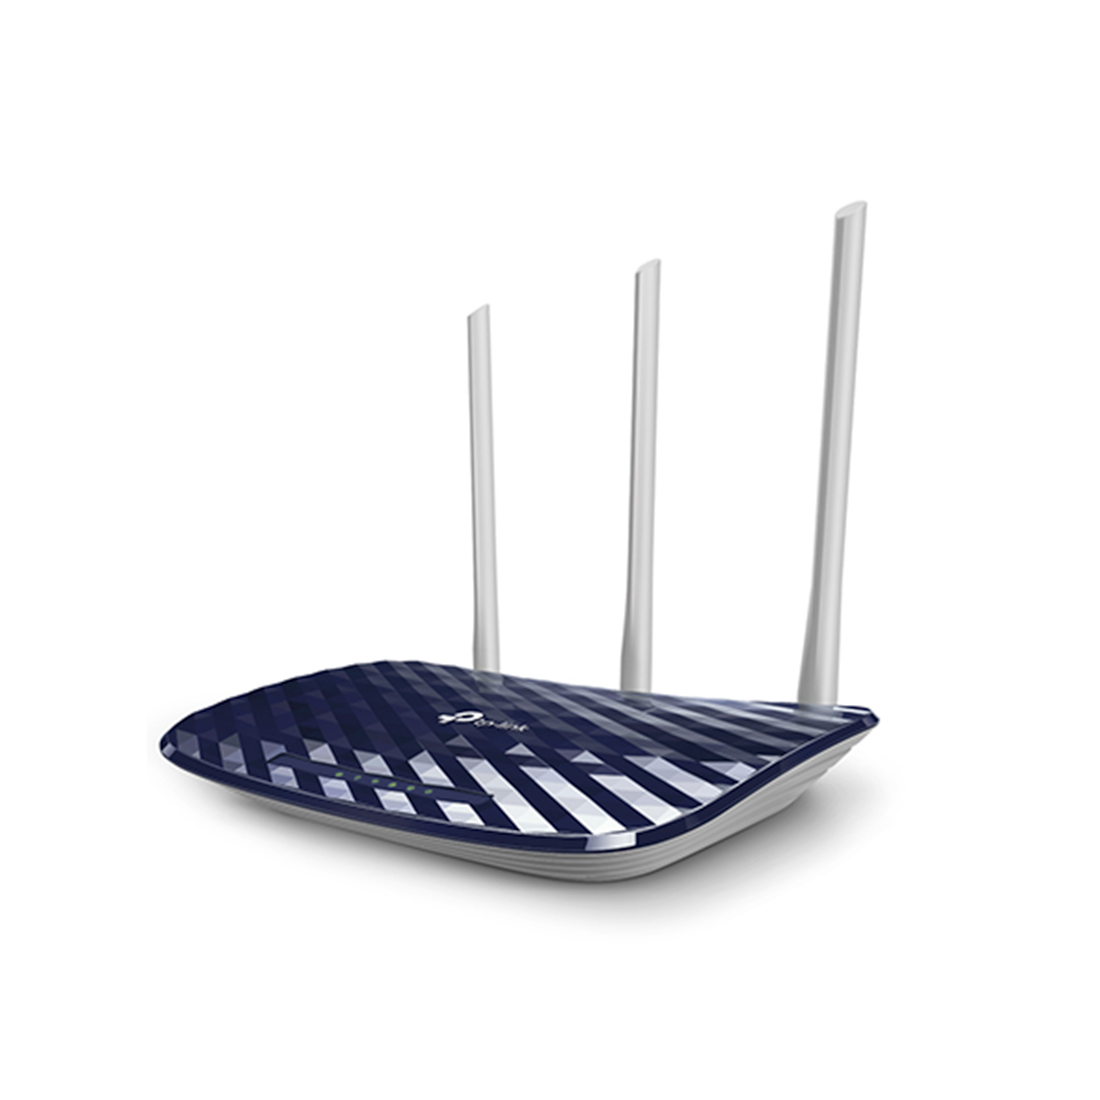 Маршрутизатор, TP-Link, Archer C20, 802.11a/b/g/n/AC. 2.4Ггц/5Ггц AC750, 1 WAN порт 10/100М + 4 LAN 